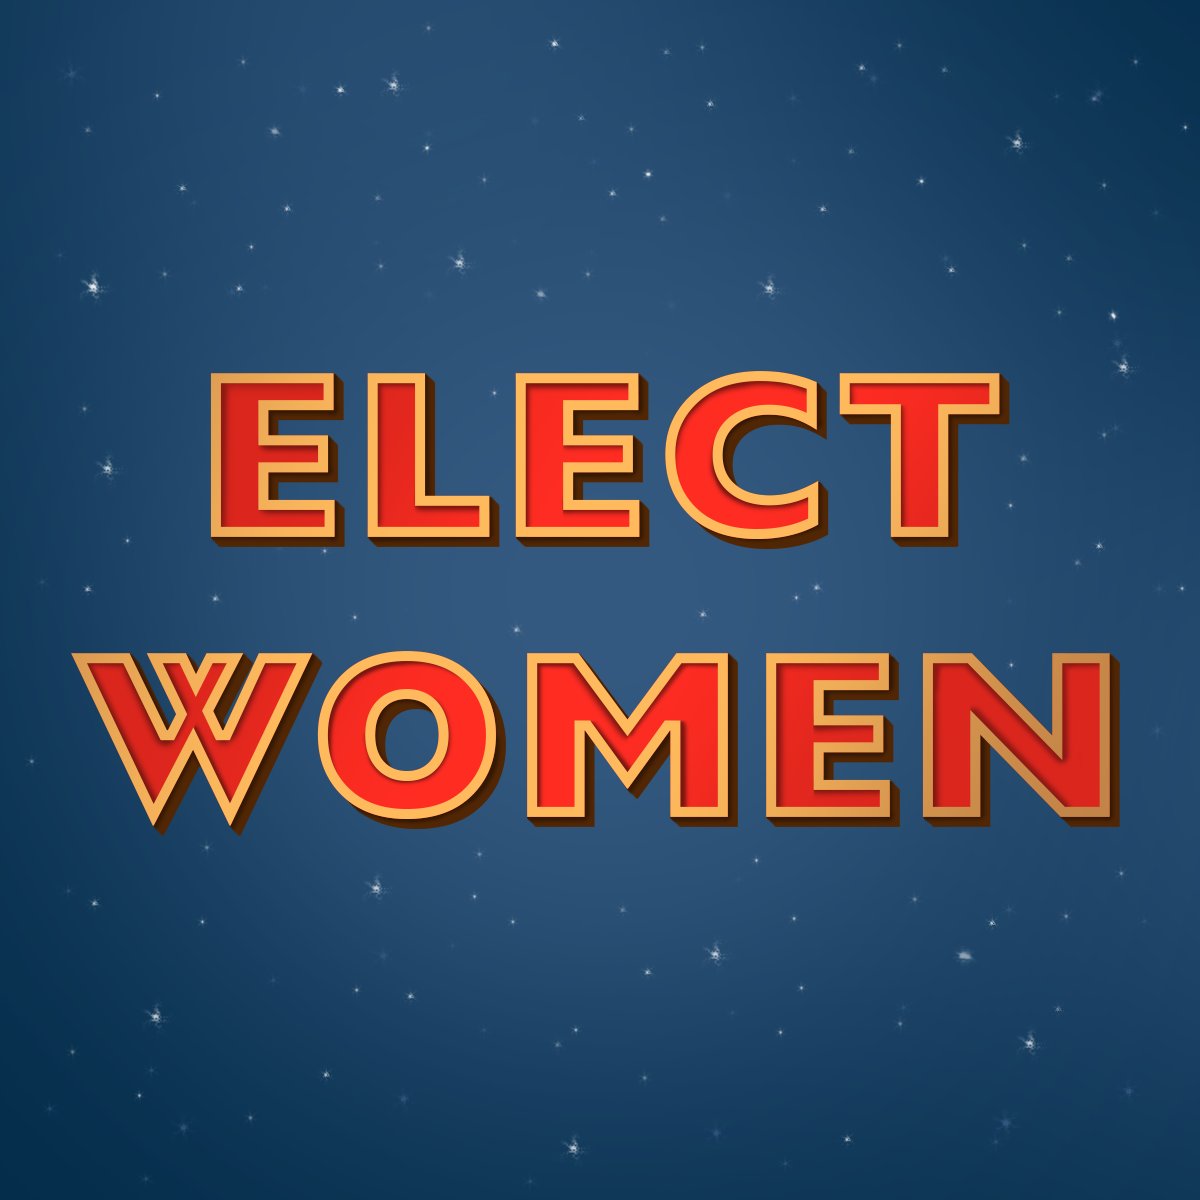 Impressive! Here are @emilyslist’s Oct. endorsements: + @BarbaraBollier for U.S. Senate + @WhitneyWilliams for Montana governor + @HaleIndy, @ngoroff, @JCisnerosTX, @wendydavis, & @VoteJackie4NY for Congress + 18 inspiring state and local candidates Support them.